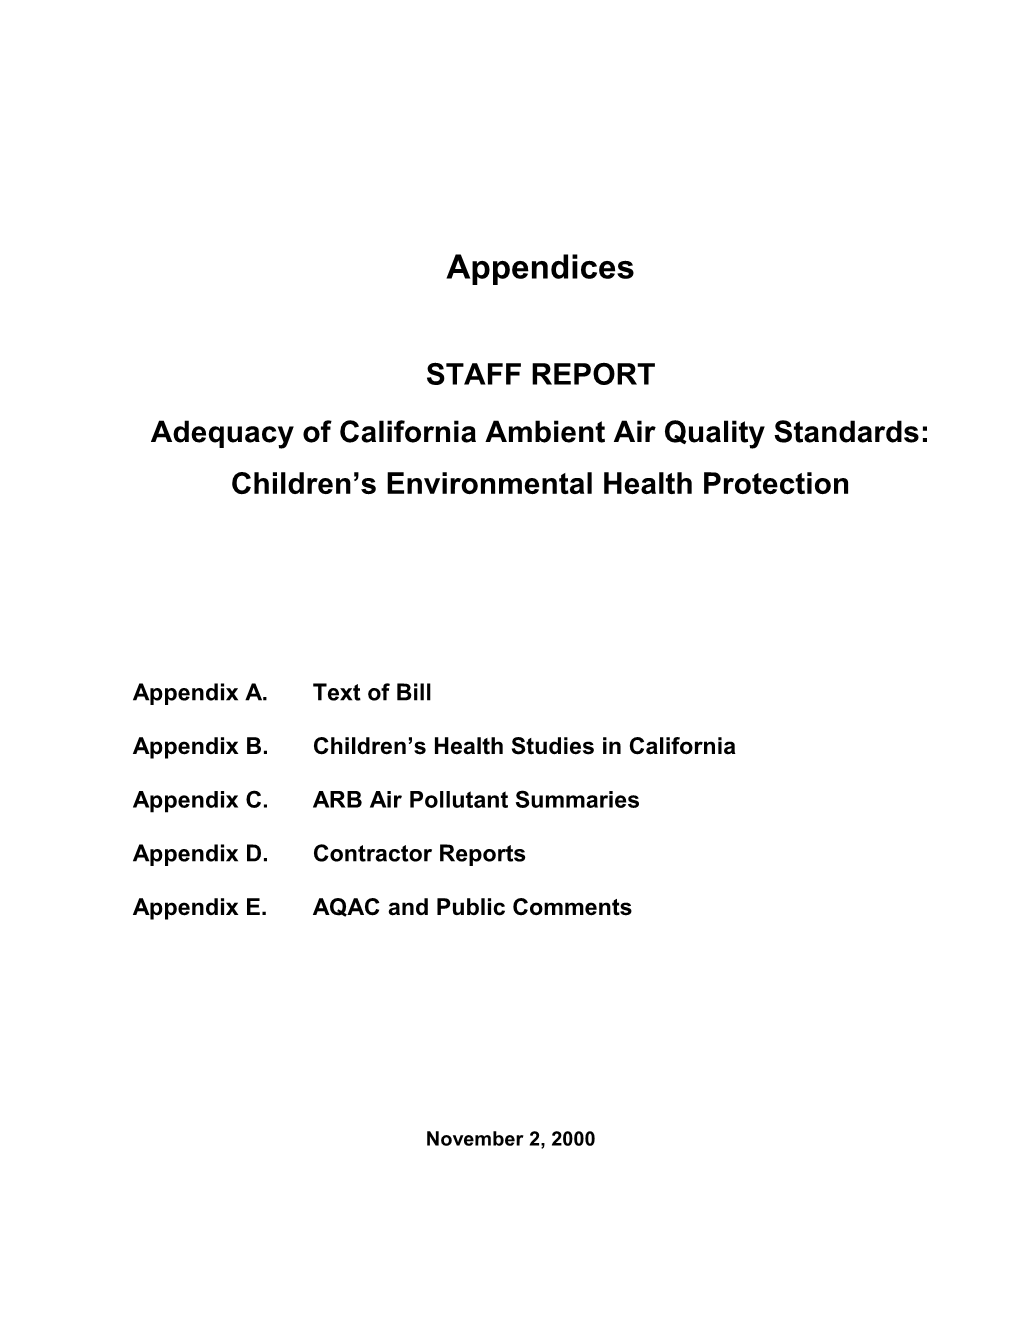 Adequacy of California Ambient Air Quality Standards: Children S Environmental Health